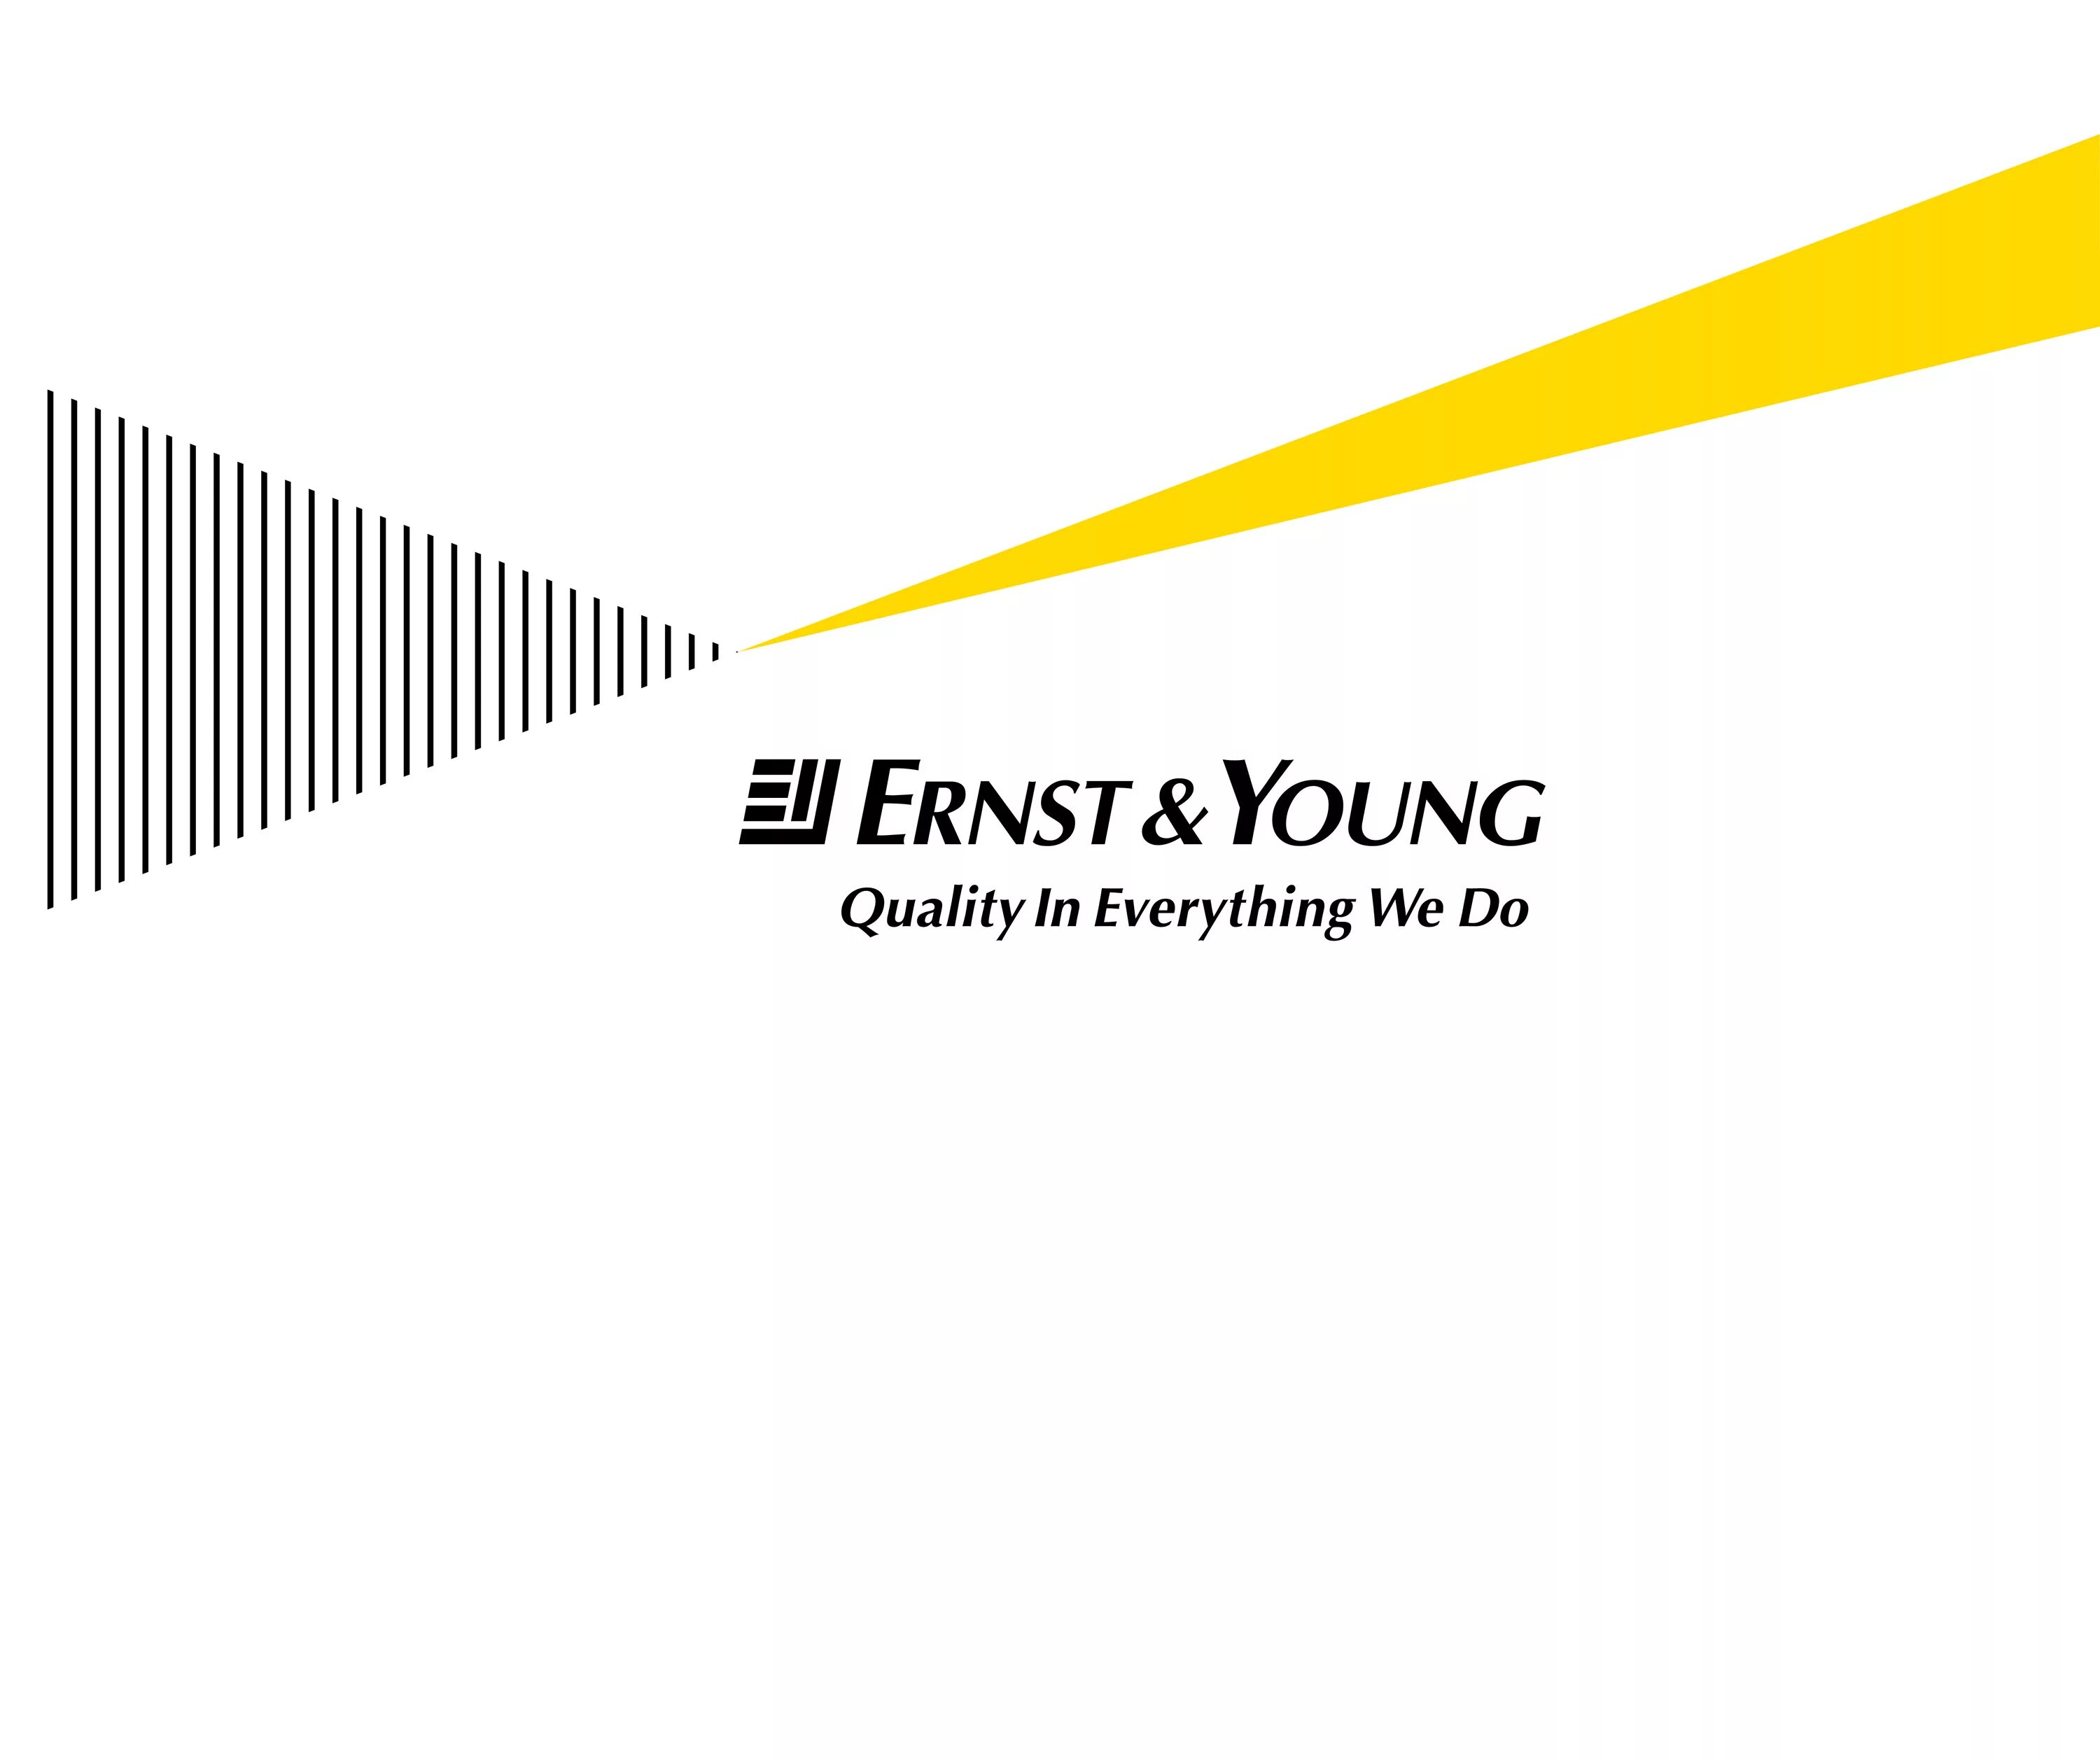 Ernst and young. Компания Ernst & young. Ernst and young лого. Ey презентация.